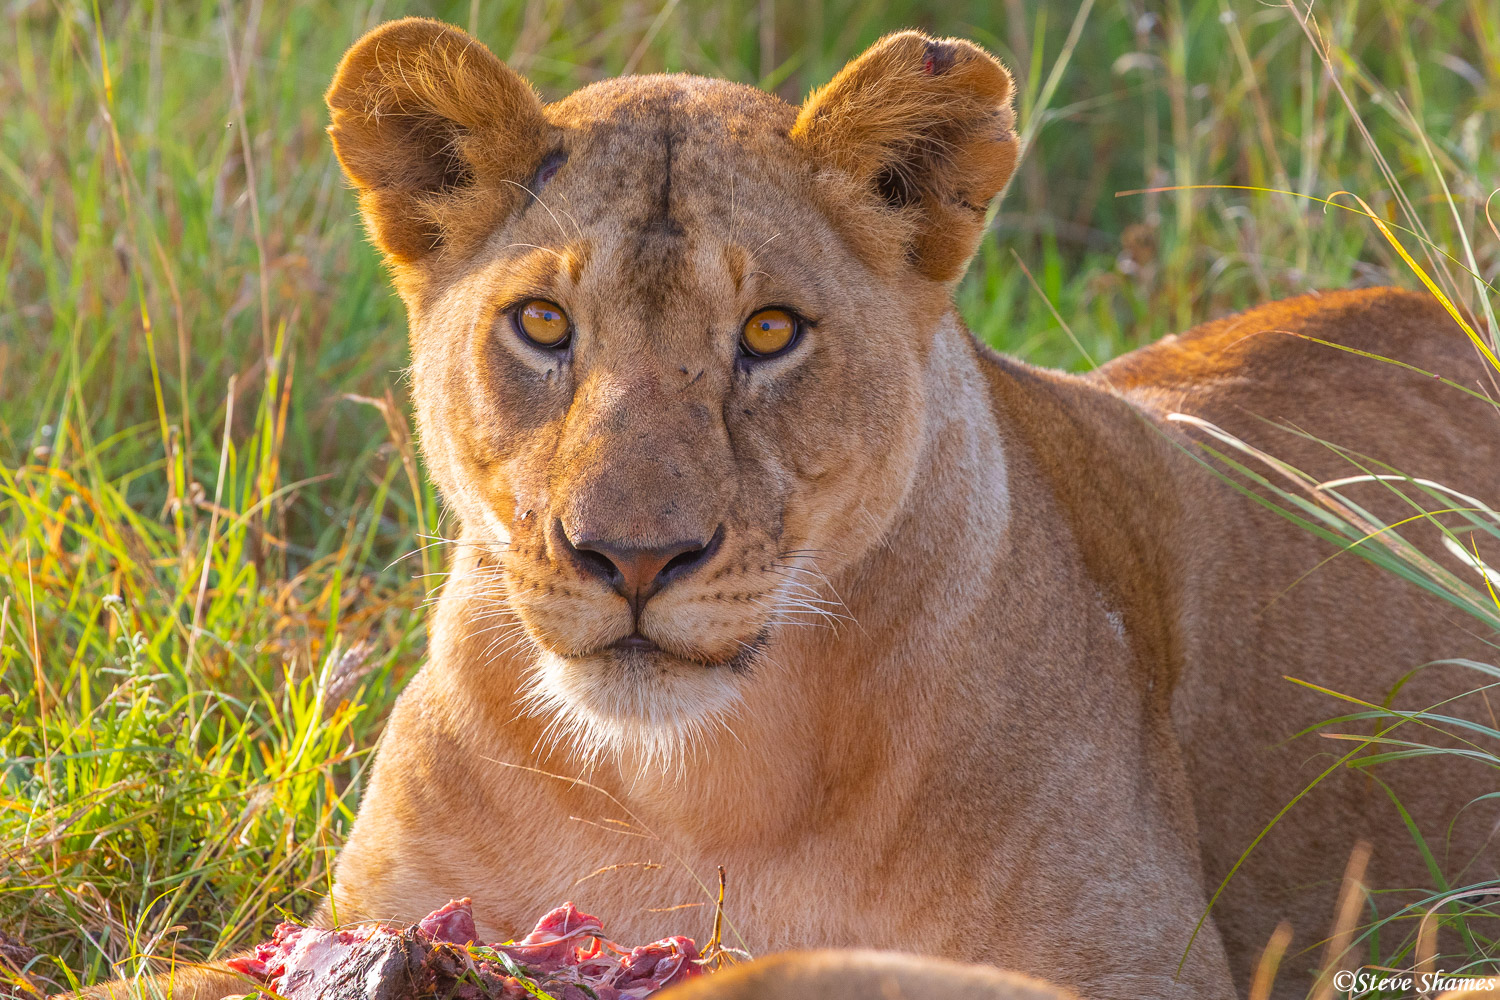 A lioness taking a break from eating to keep an eye on us.